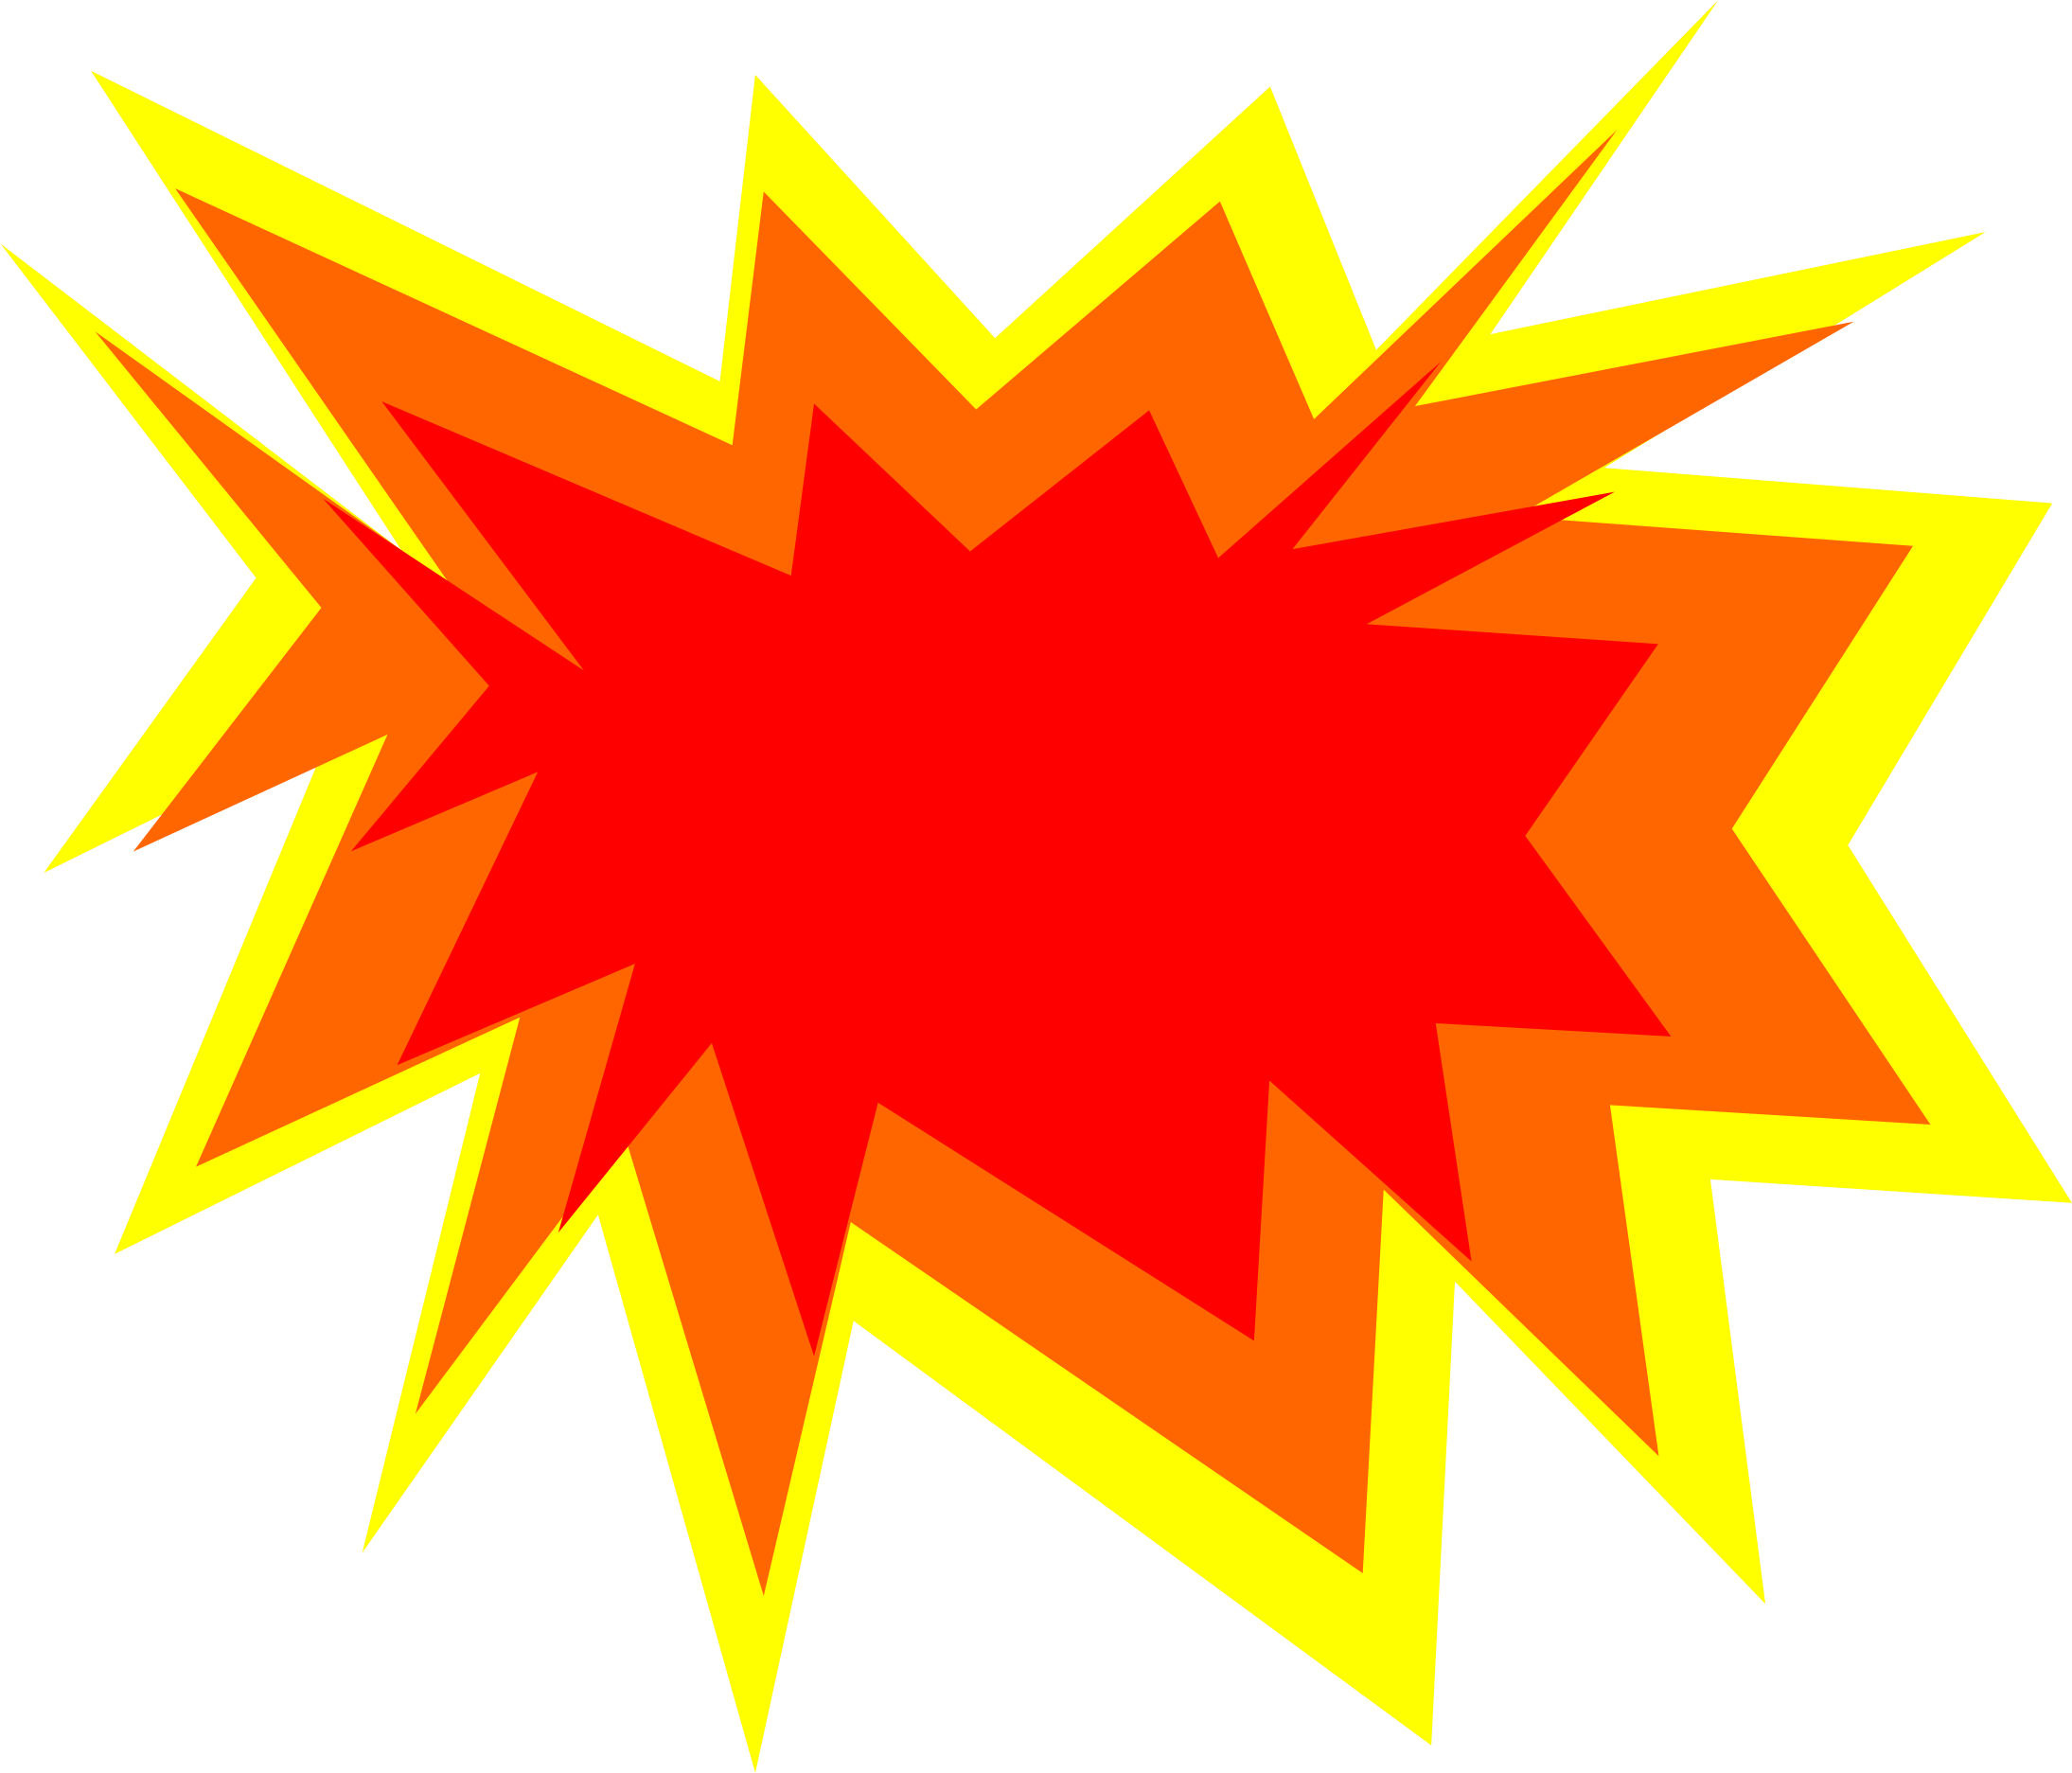 Explosion effect clipart.